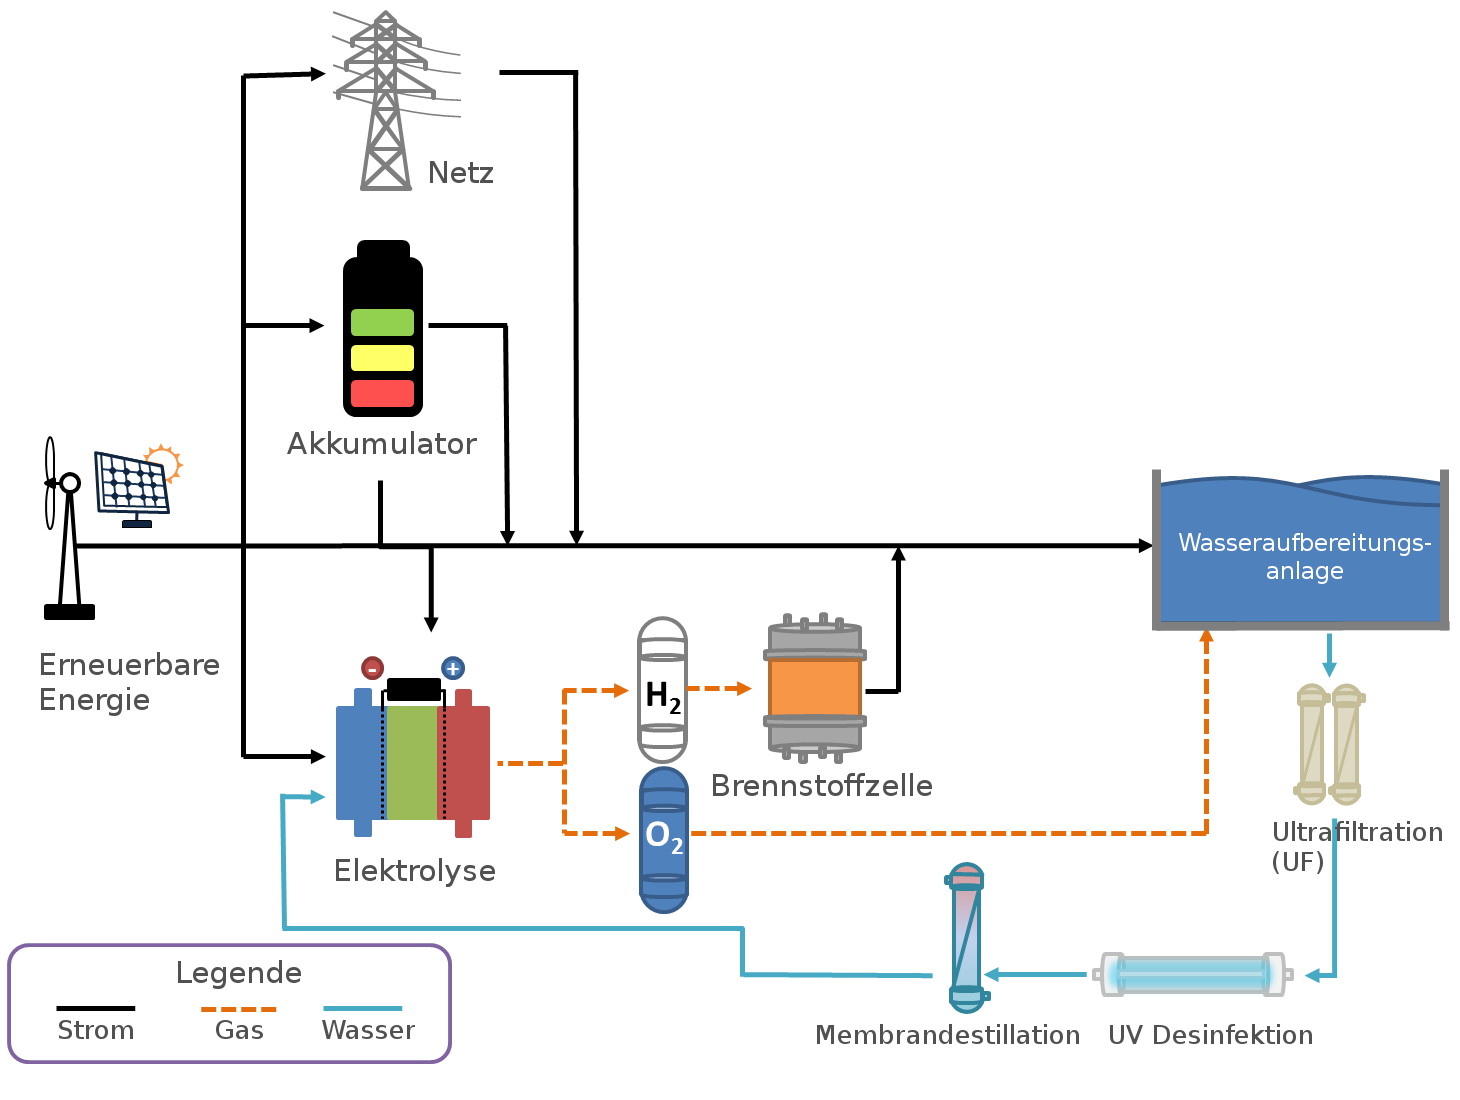 Operation of a Water Reuse Recovery Facility (WRRF) with renewable electricity and water electrolysis